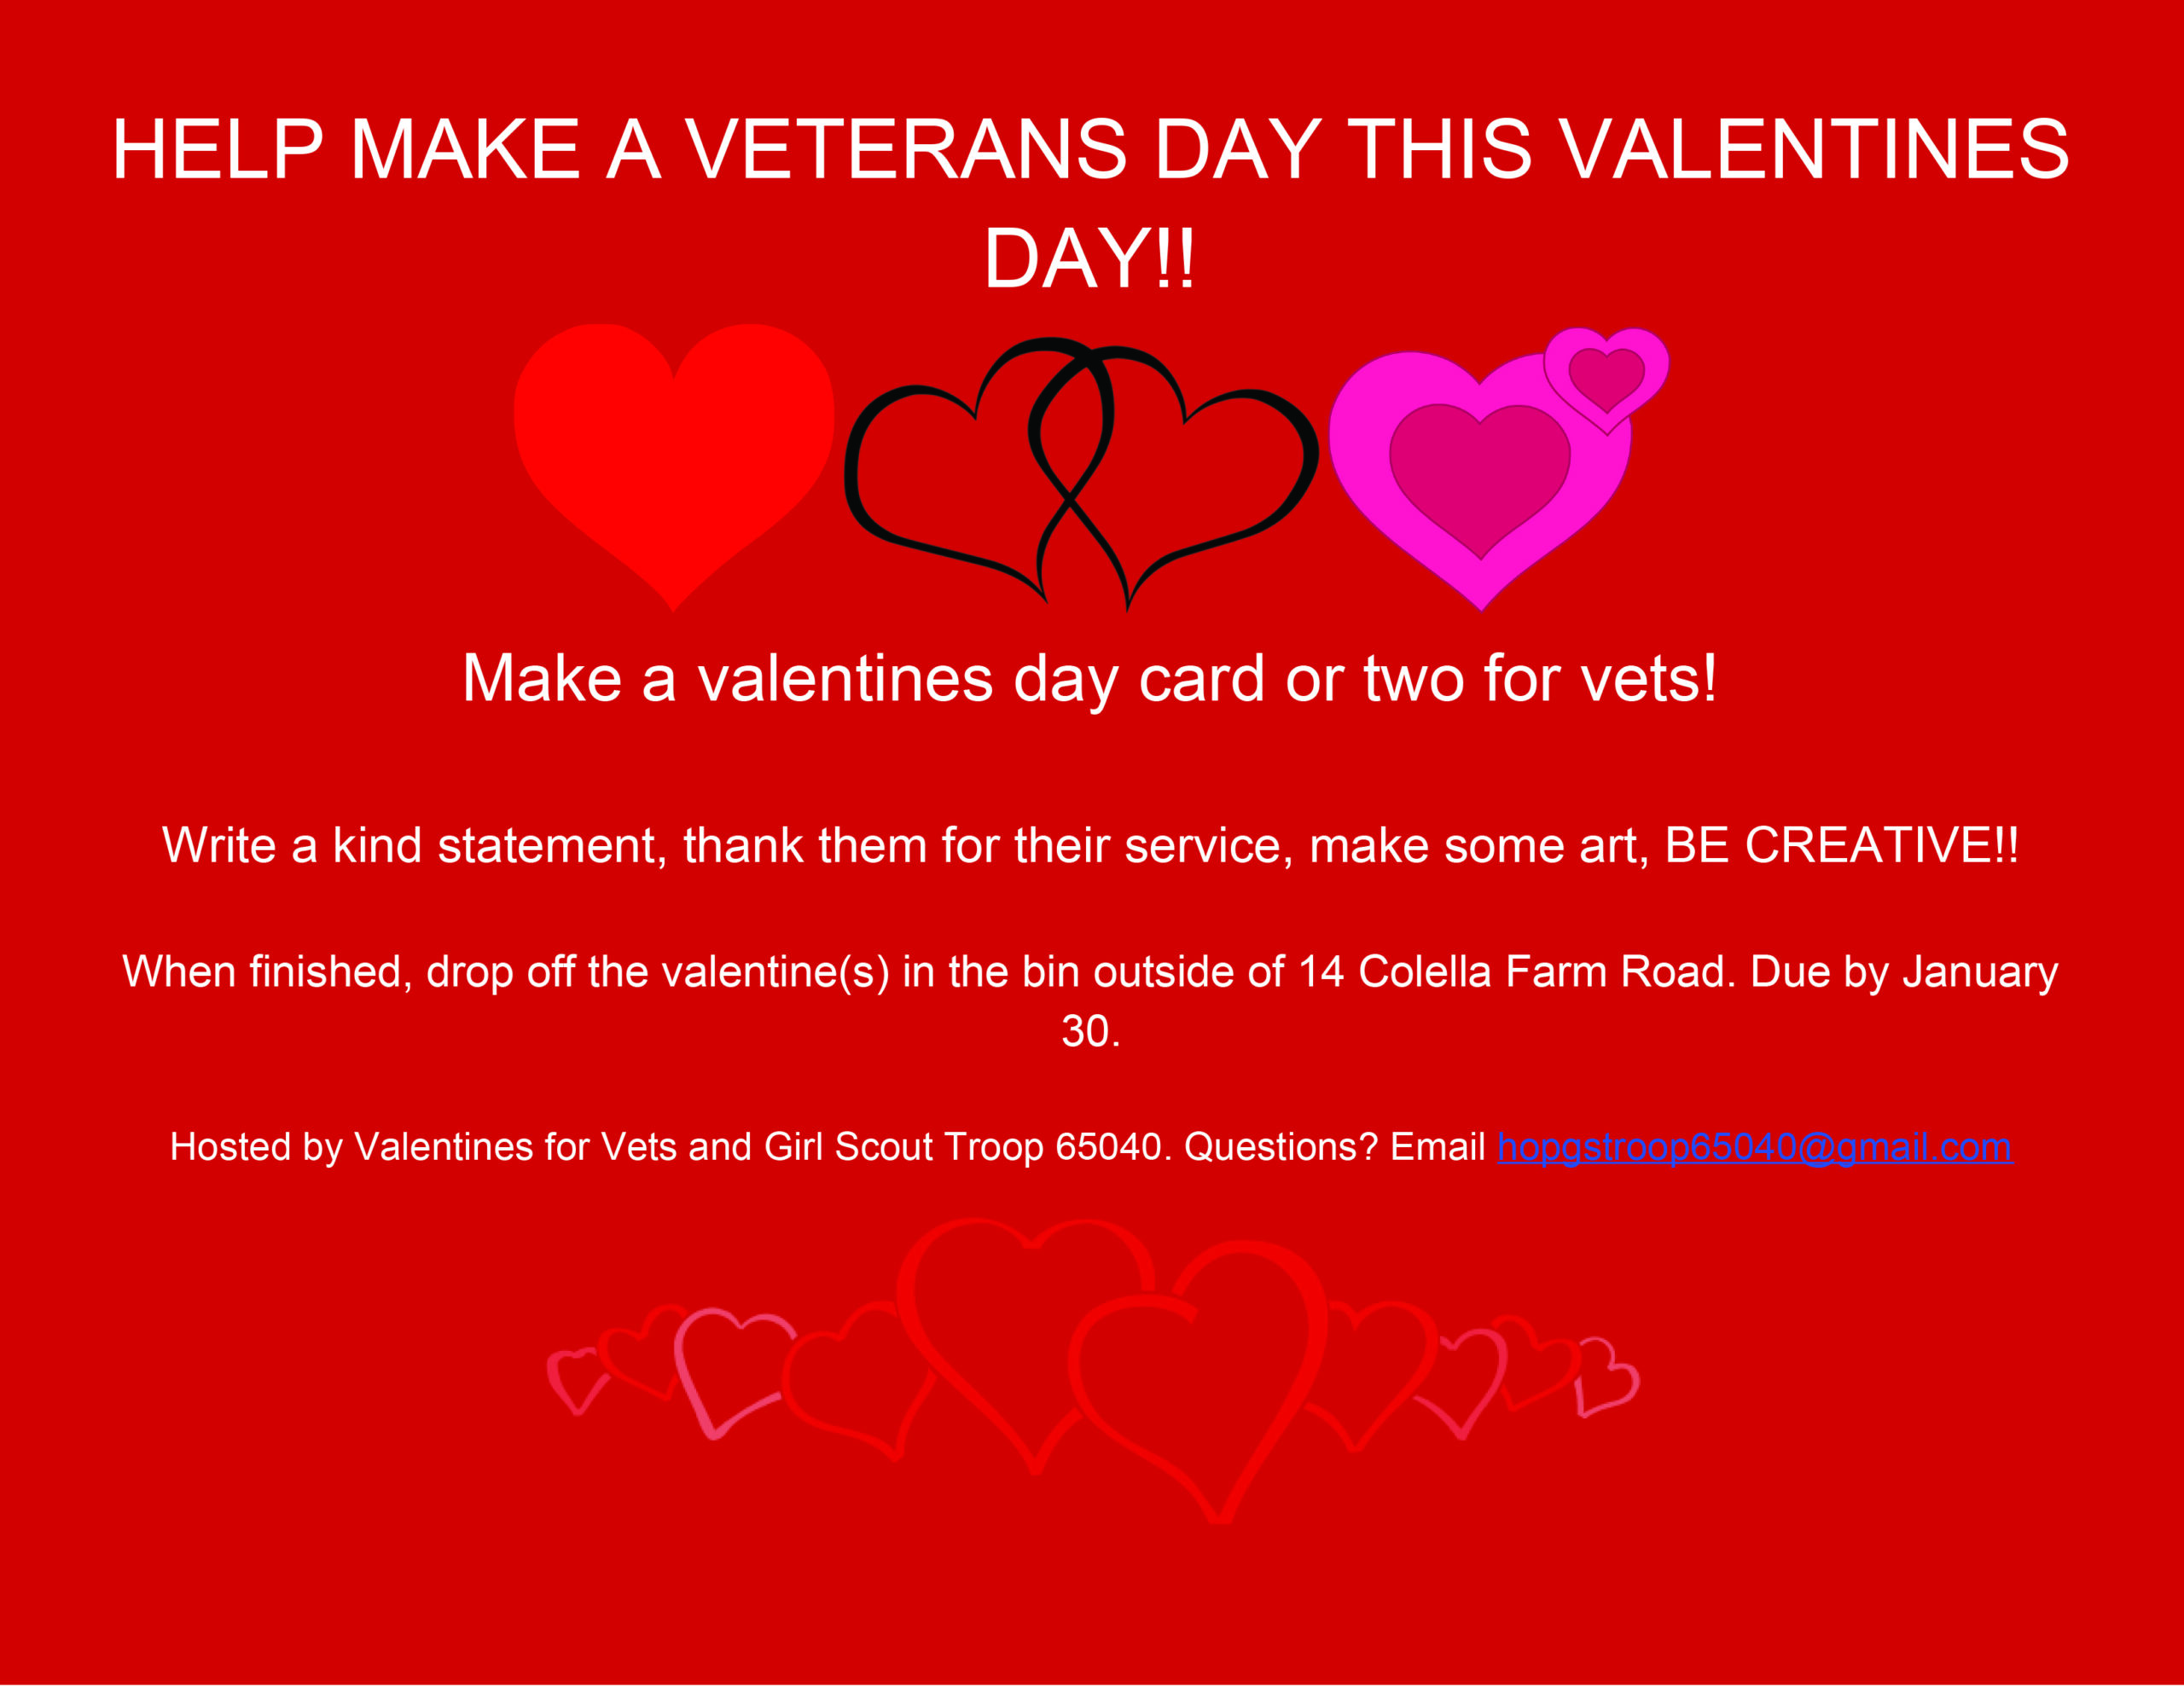 Girl Scouts seek help making Valentine’s Day cards for veterans